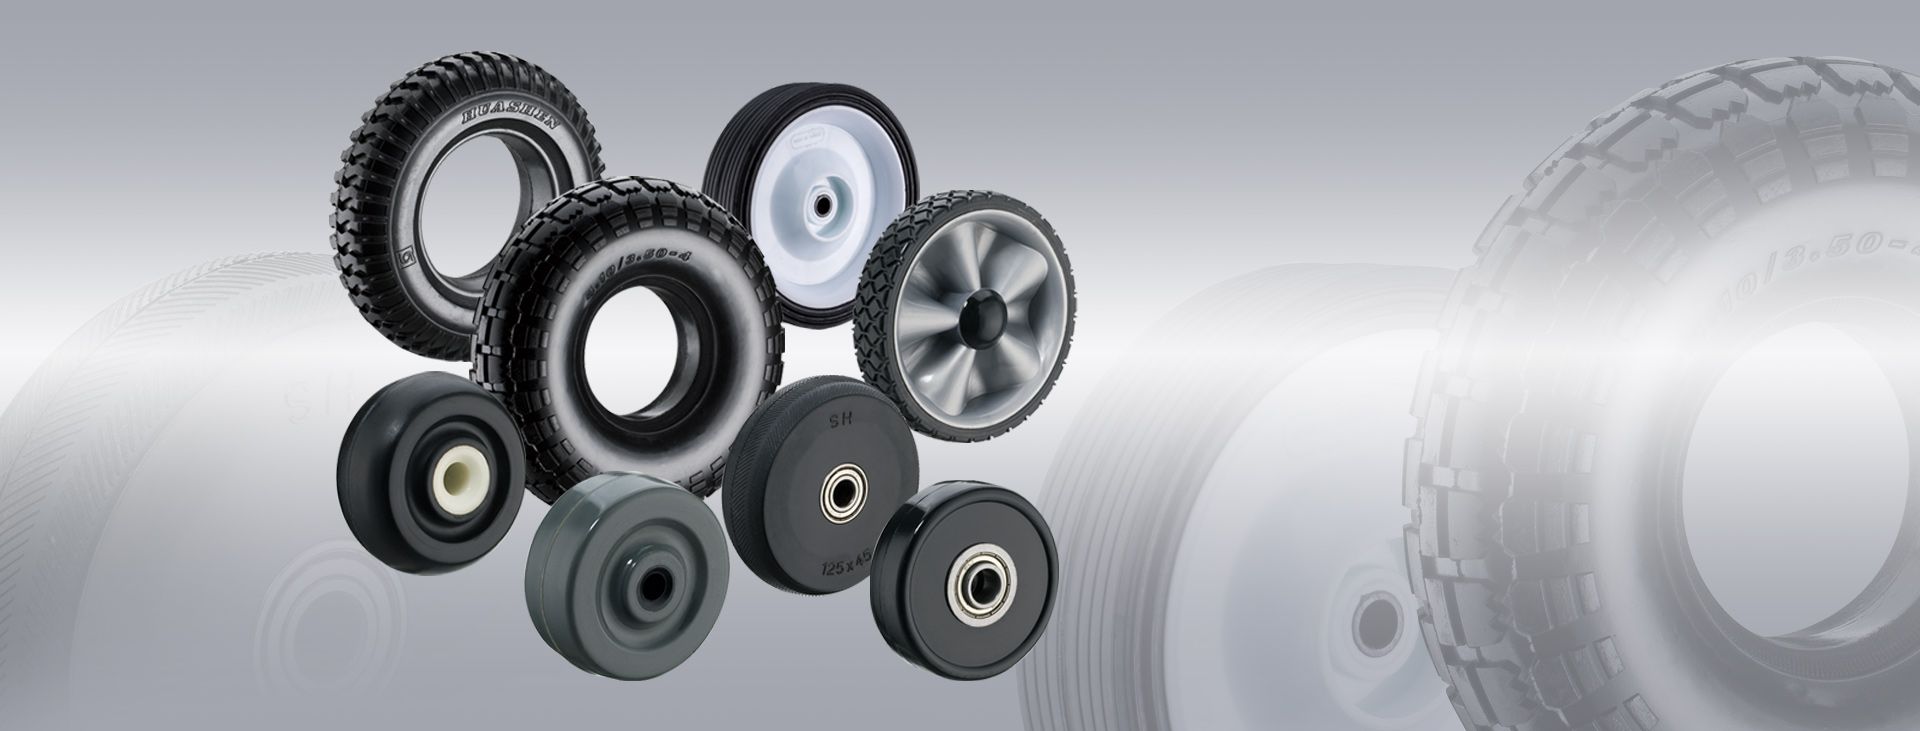 Variety of Rubber Wheels Manufacturing